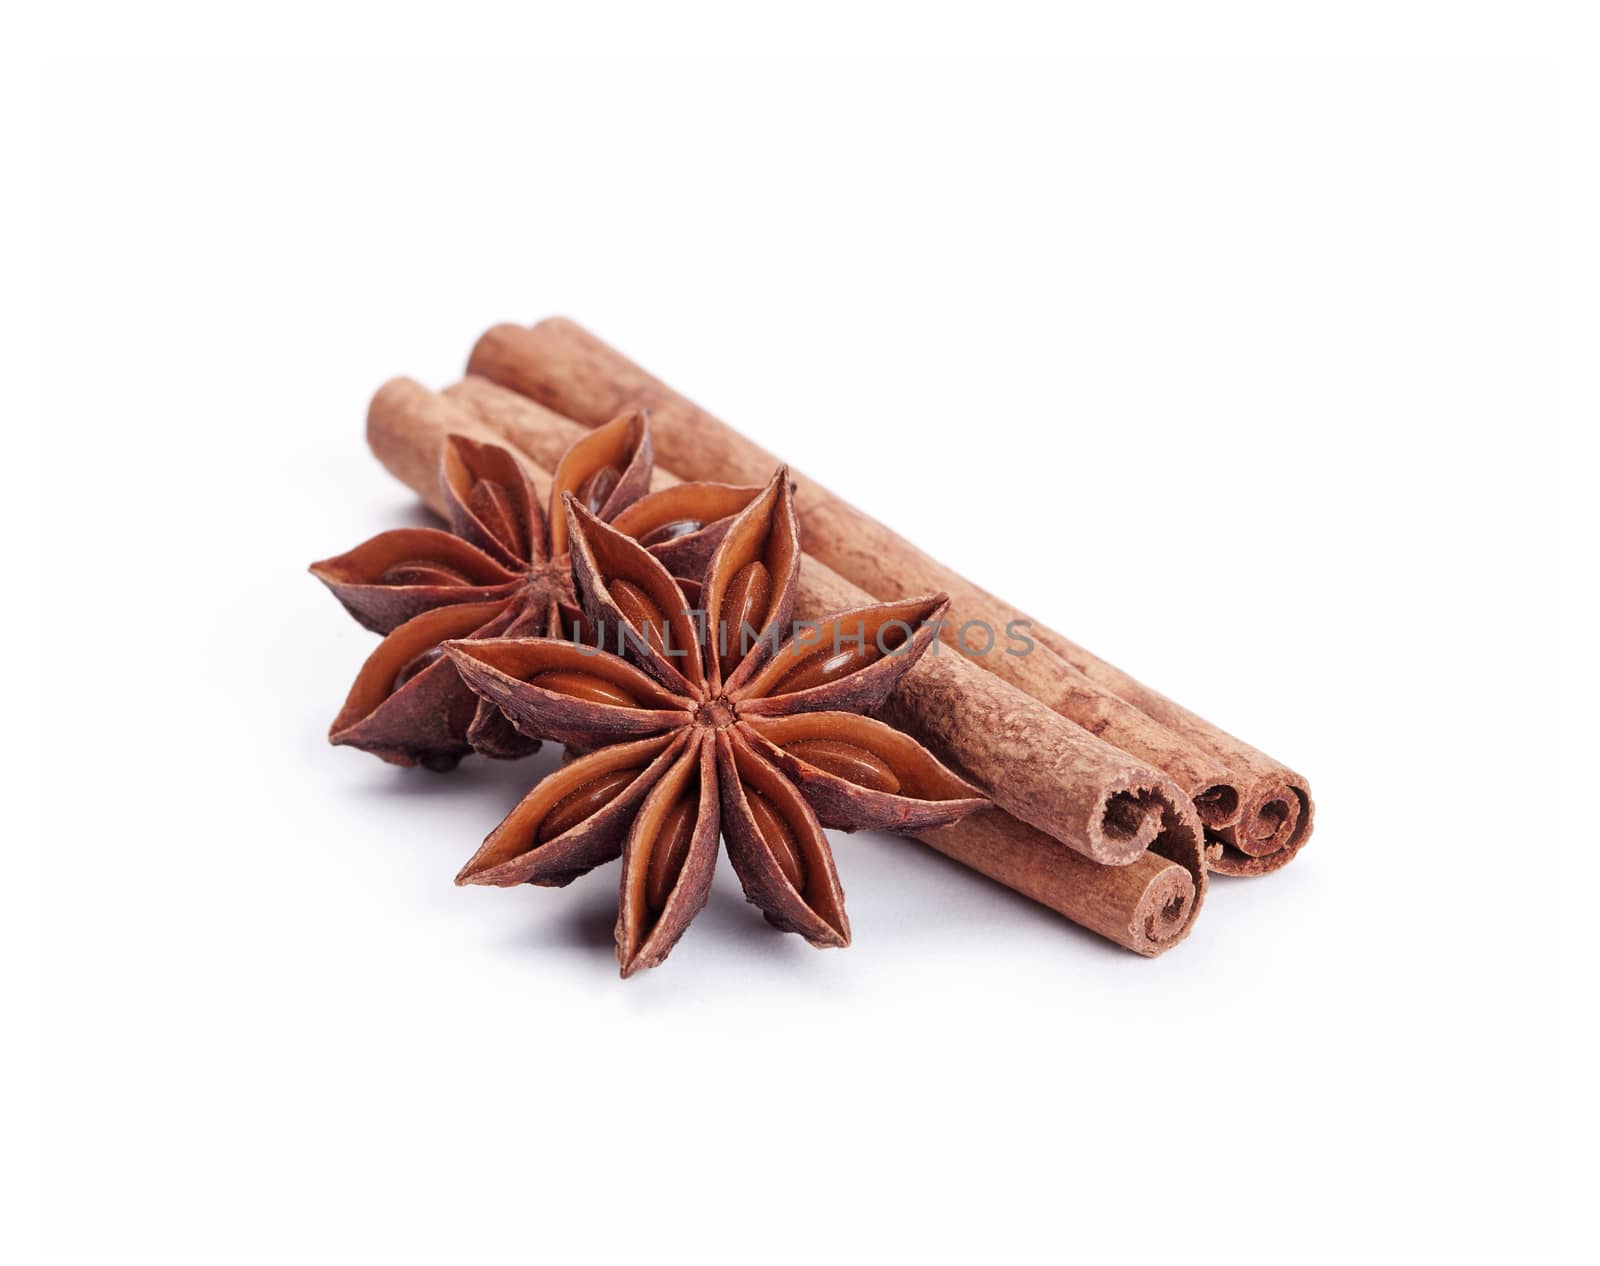 cinnamon stick and star anise spice isolated on white background, closeup